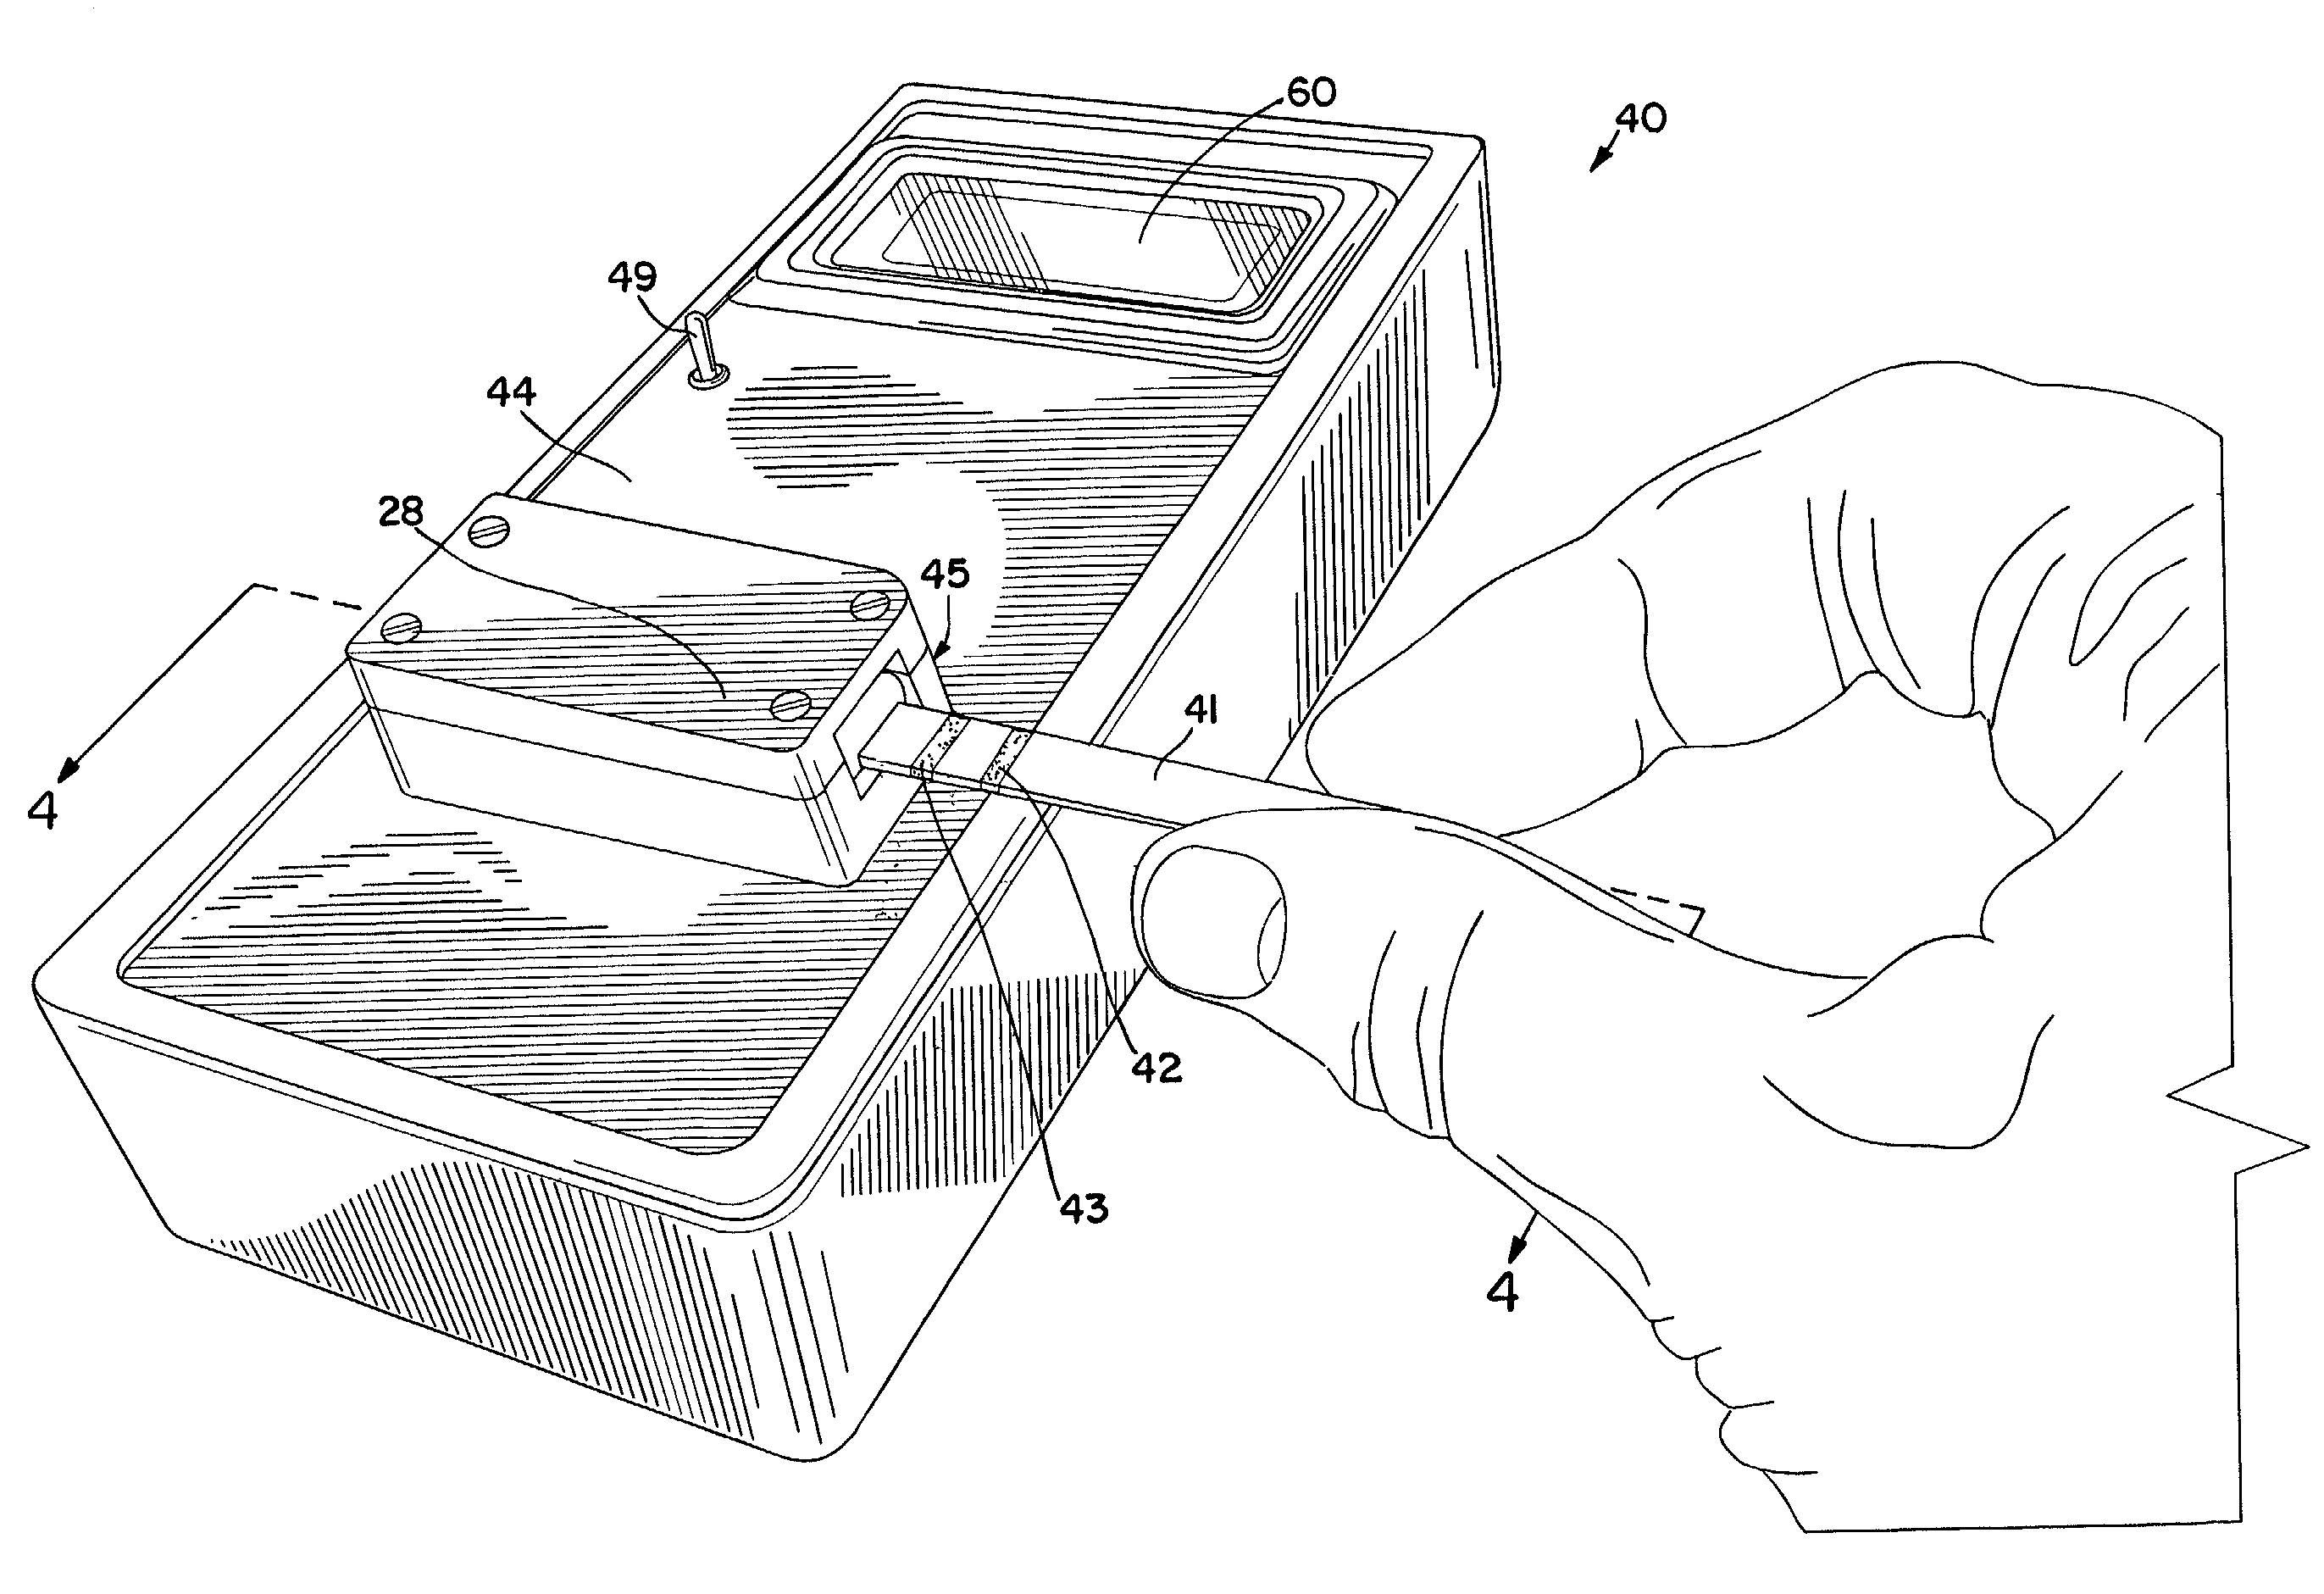 Reading device, method, and system for conducting lateral flow assays